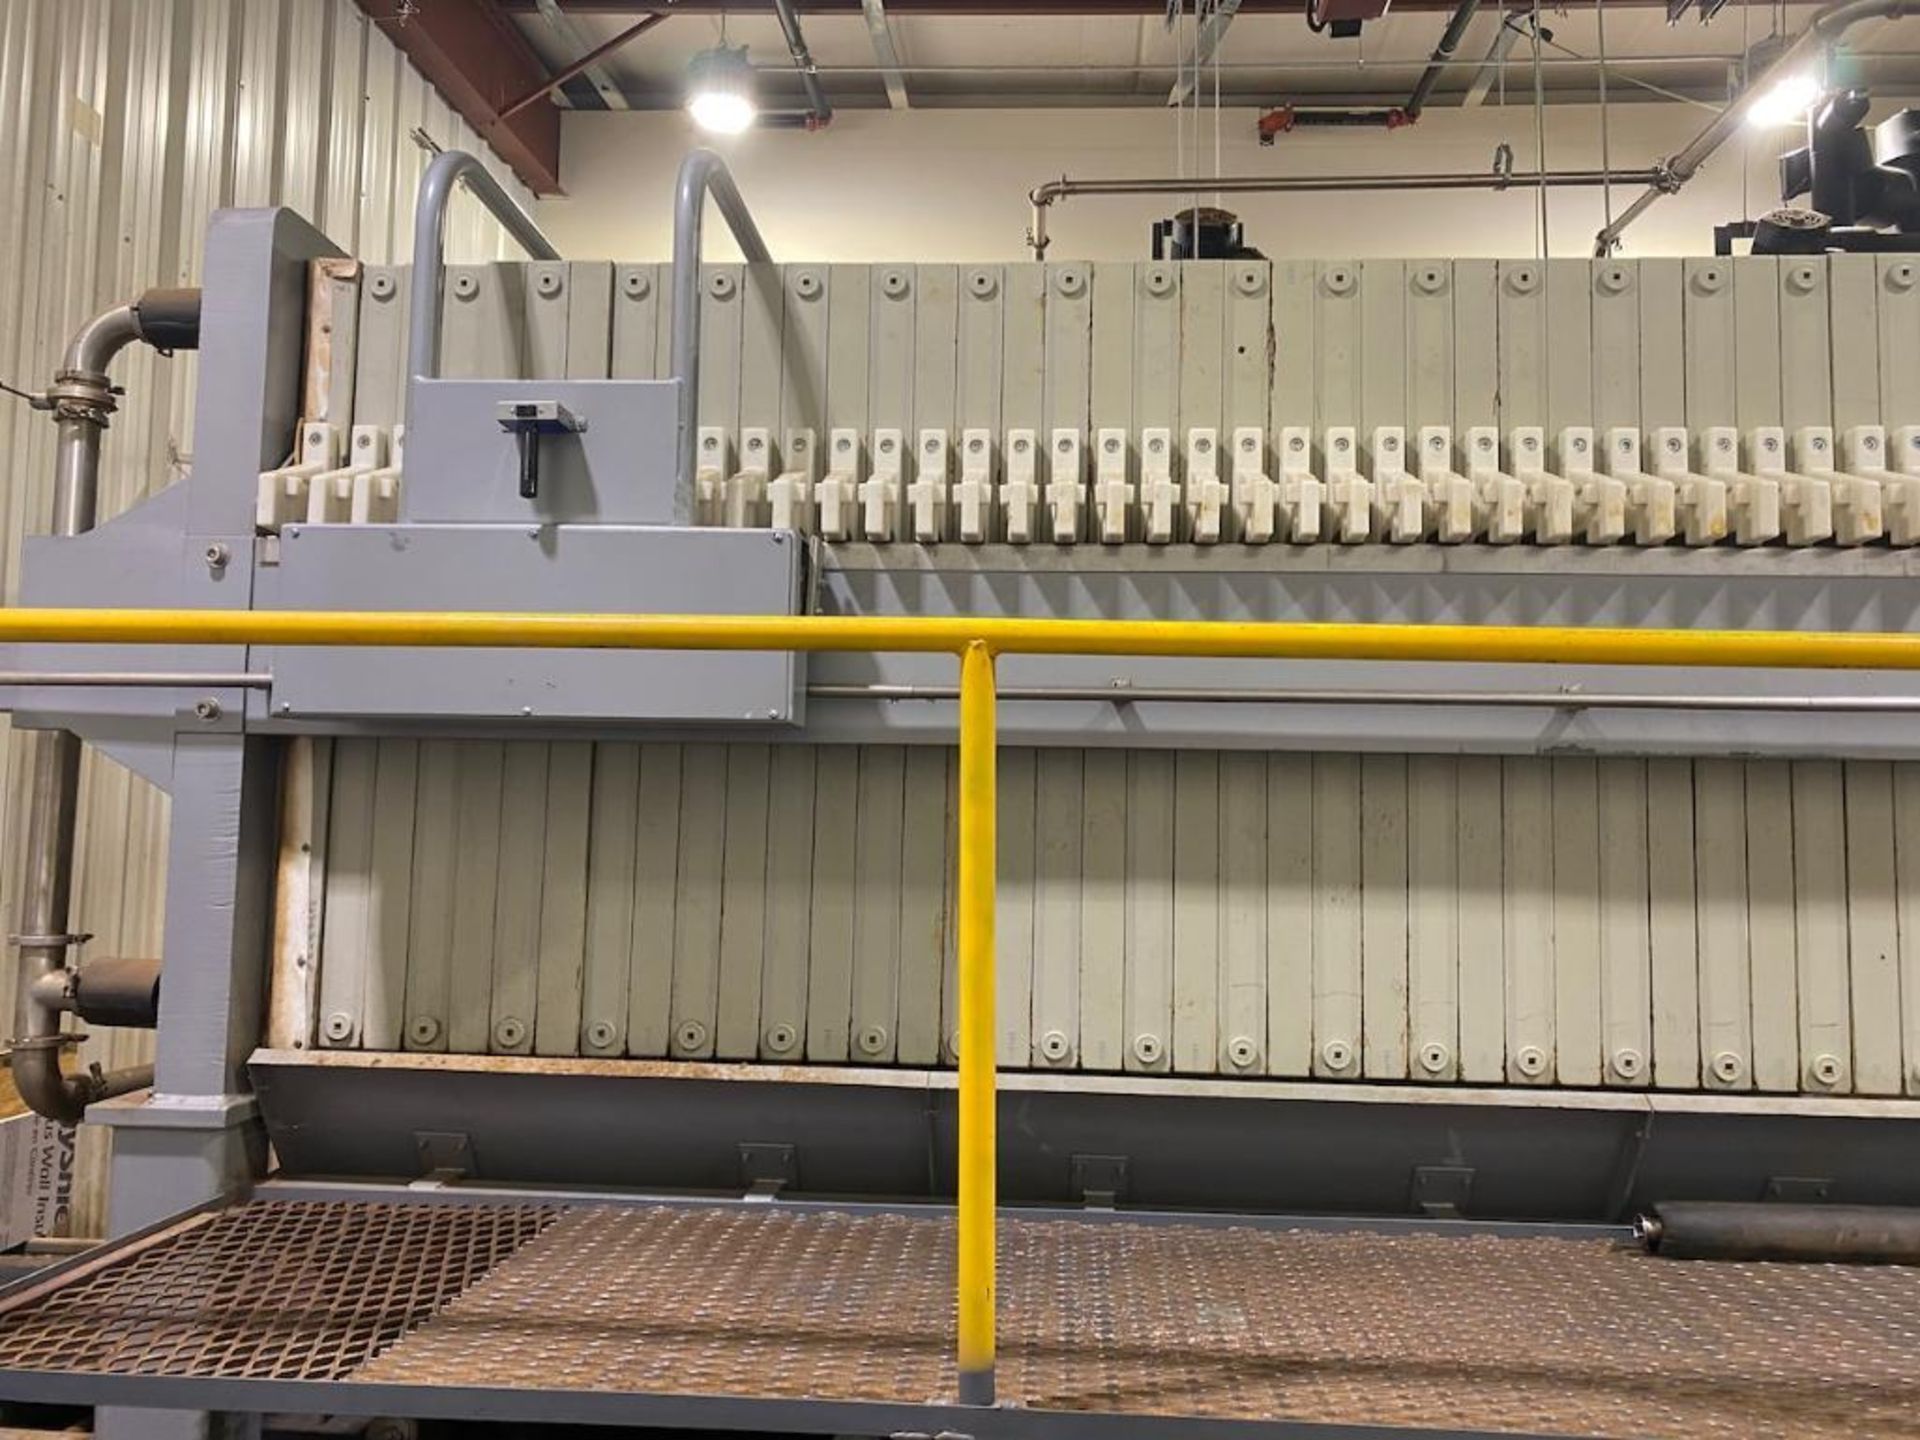 2019 AE 100 Cubic Foot 1500mm Automatic Filter Press - Image 5 of 14